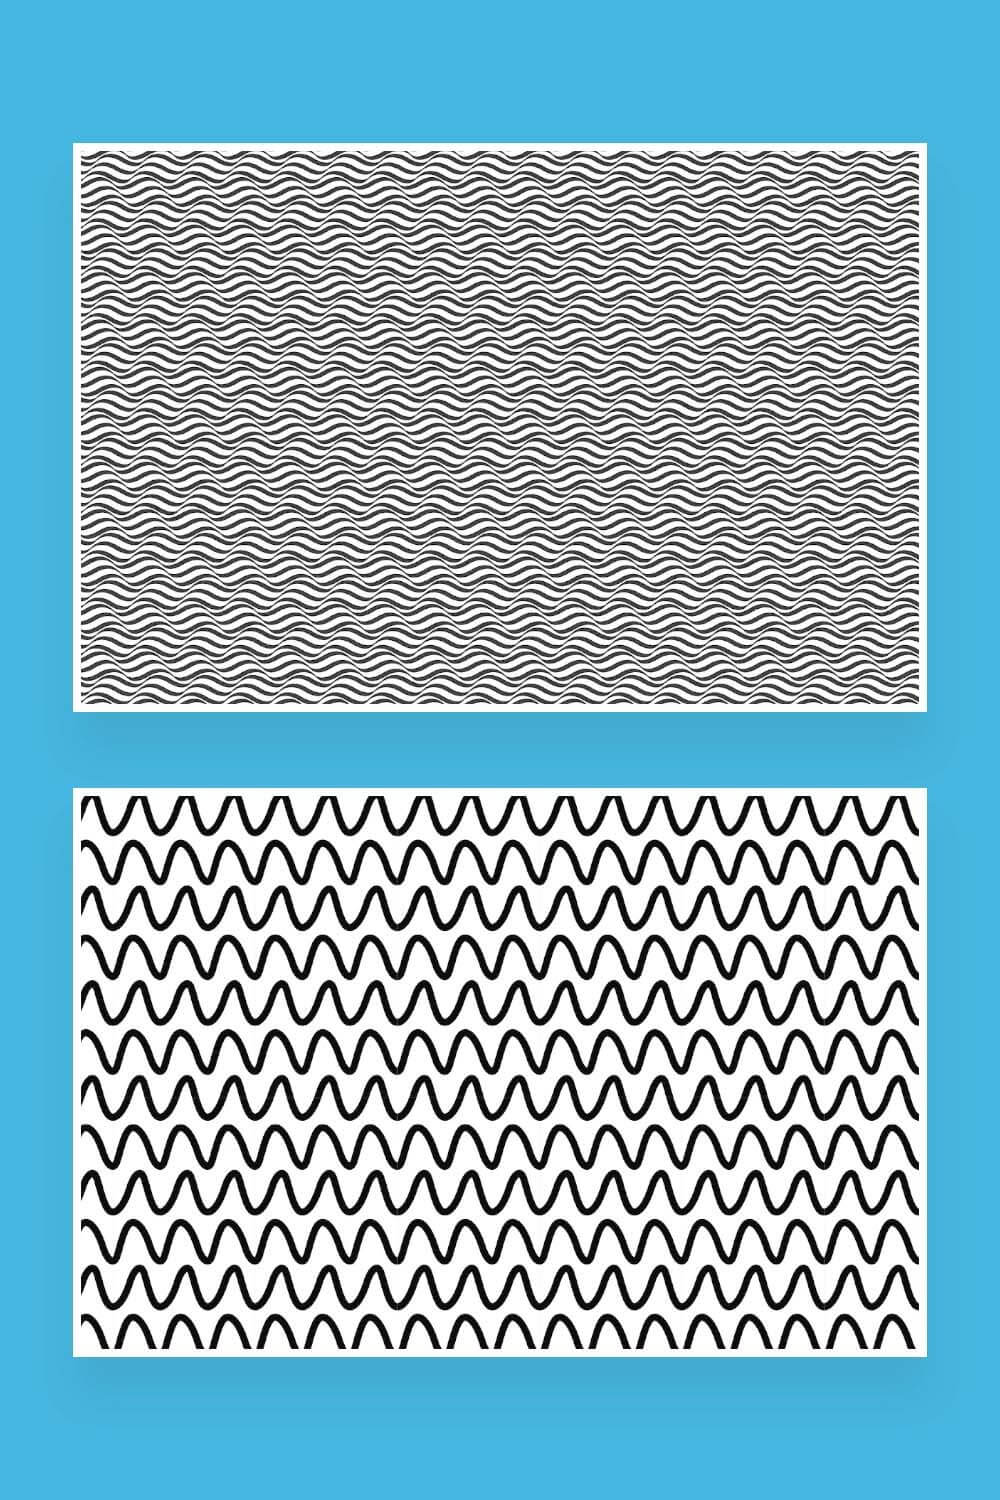 Two types of zigzag seamless patterns.